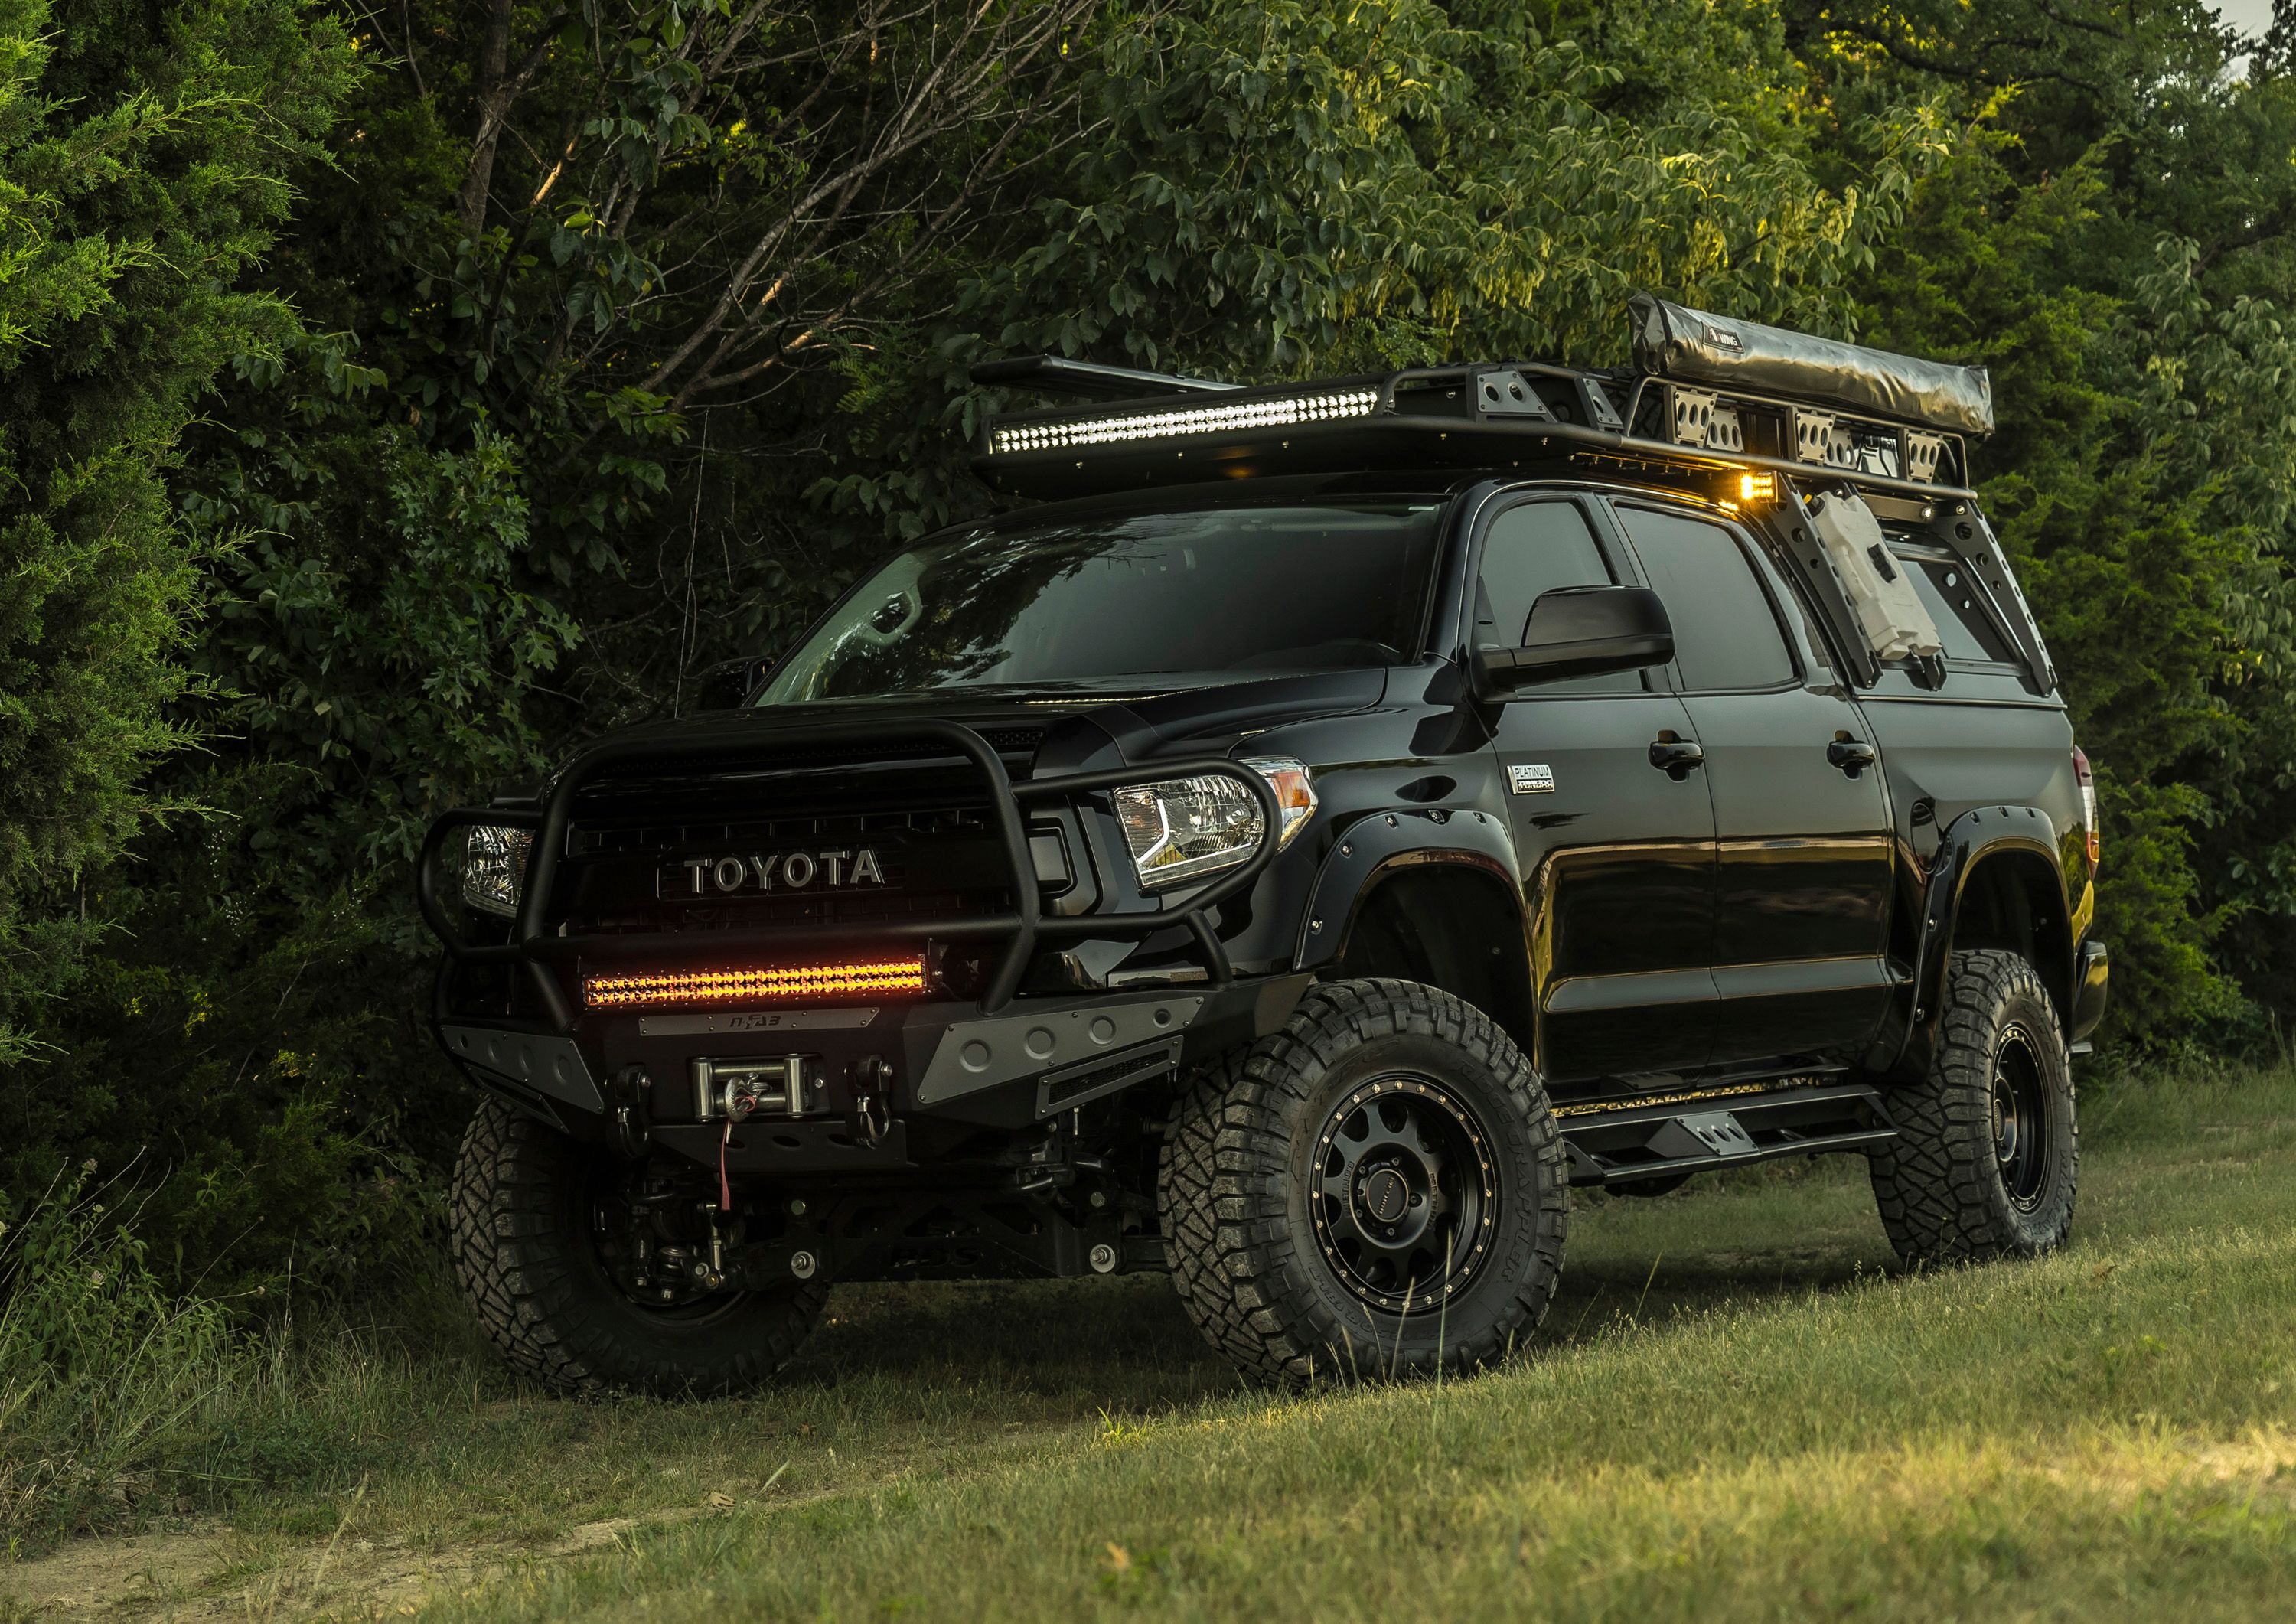 2018 Toyota Tundra for Kevin Costner by Working Complete Customs